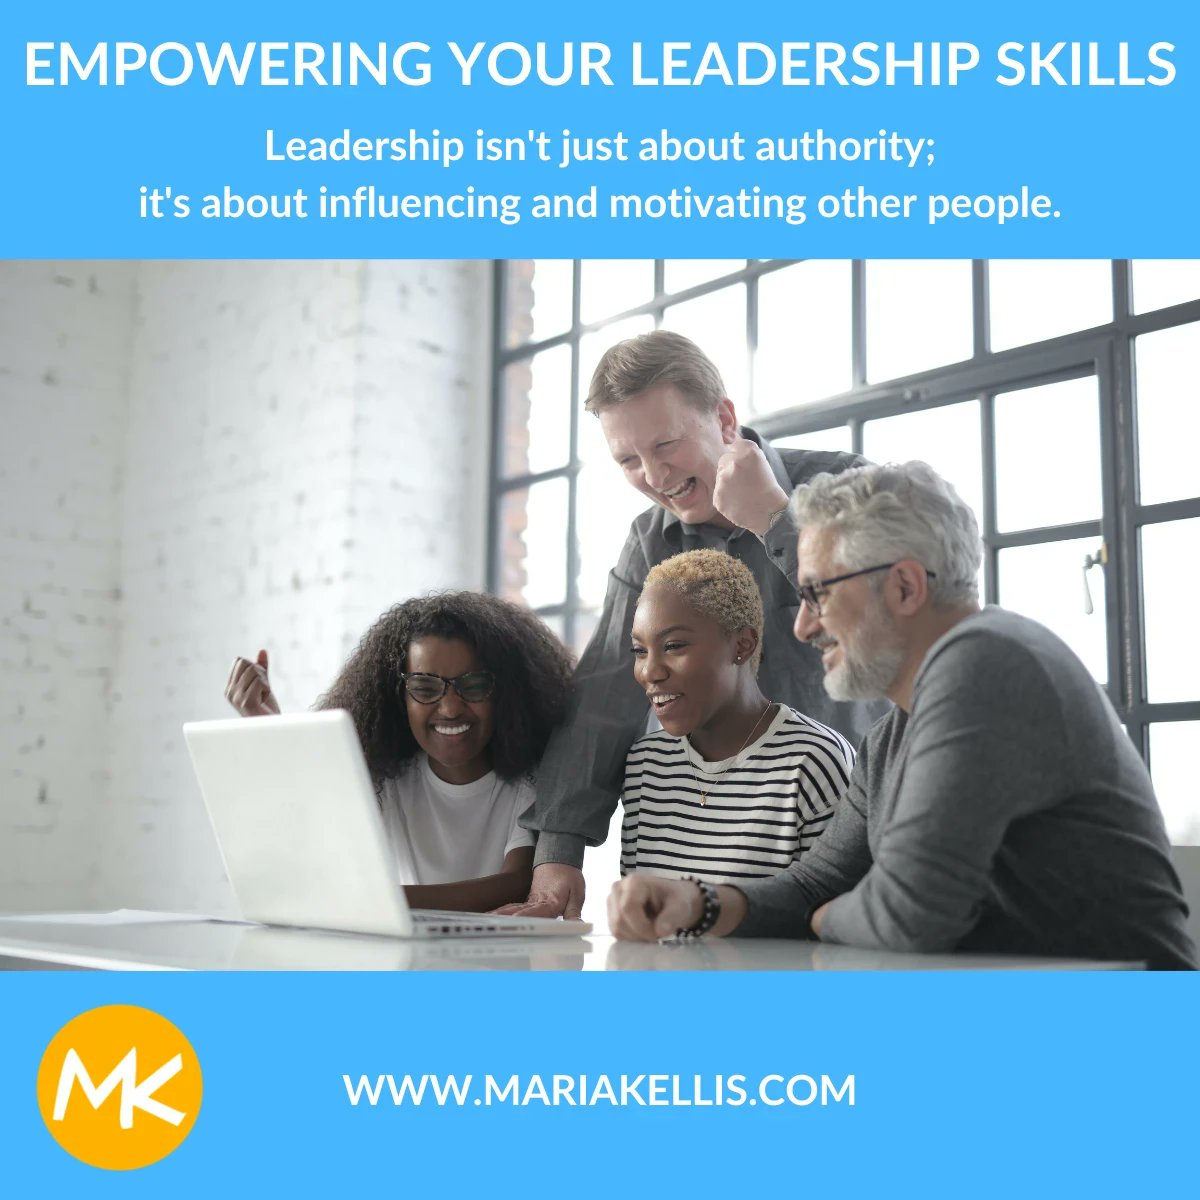 To be a successful leader, you must make sure that your natural charisma and intuition are working for you. Knowing what to say, how to influence people, and how to stay one step ahead of the competition are all essential skills for any leader.

#empoweringleadership #mariakellis